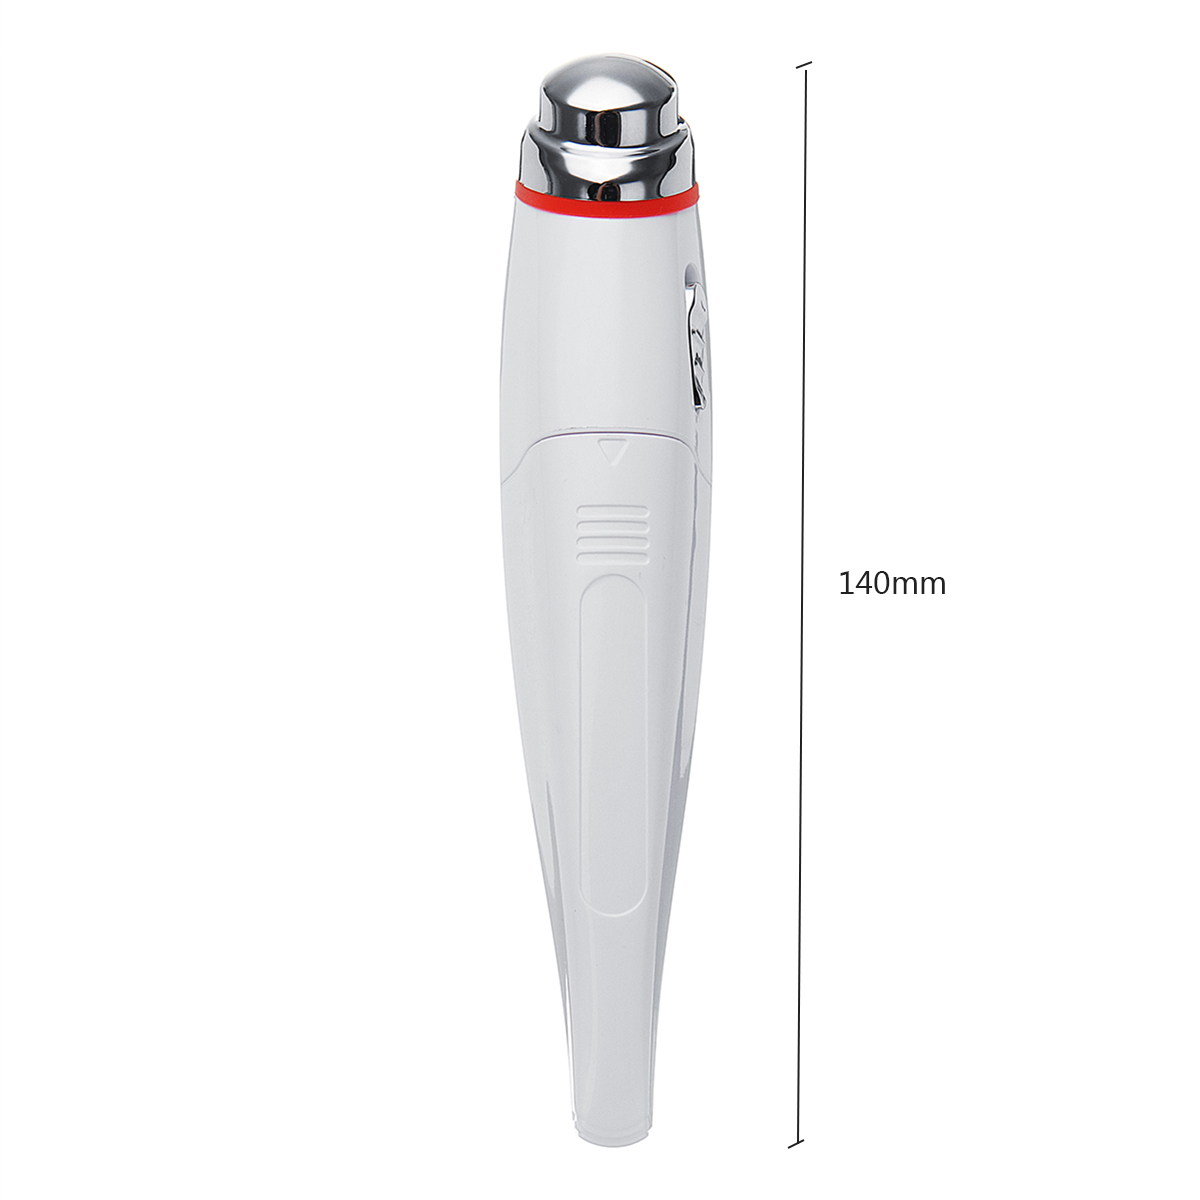 Vibration-Ionic-Sonic-Eye-Massager-Anti-ageing-Wrinkle-Pen-Wand-Relieving-Puffiness-Dark-Circle-Eye-1405716